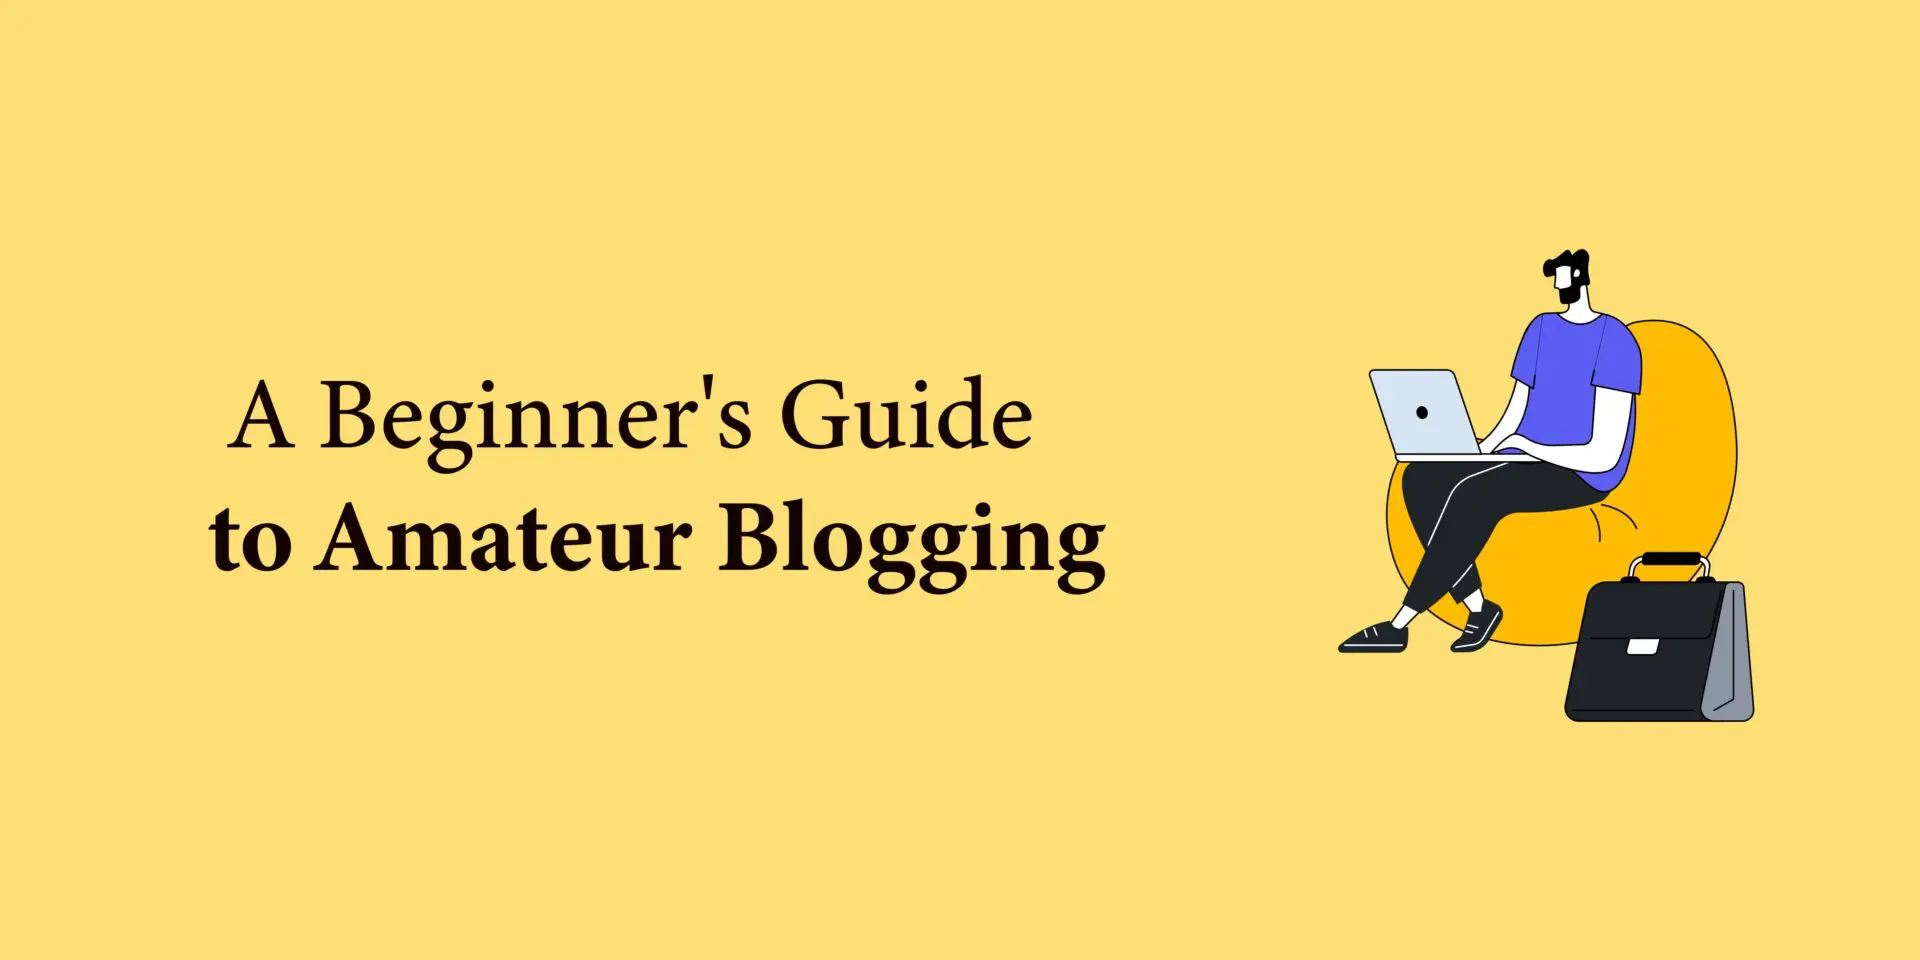 Amateur Blogging: Do’s & Don’ts of Starting Out, Tips for Success